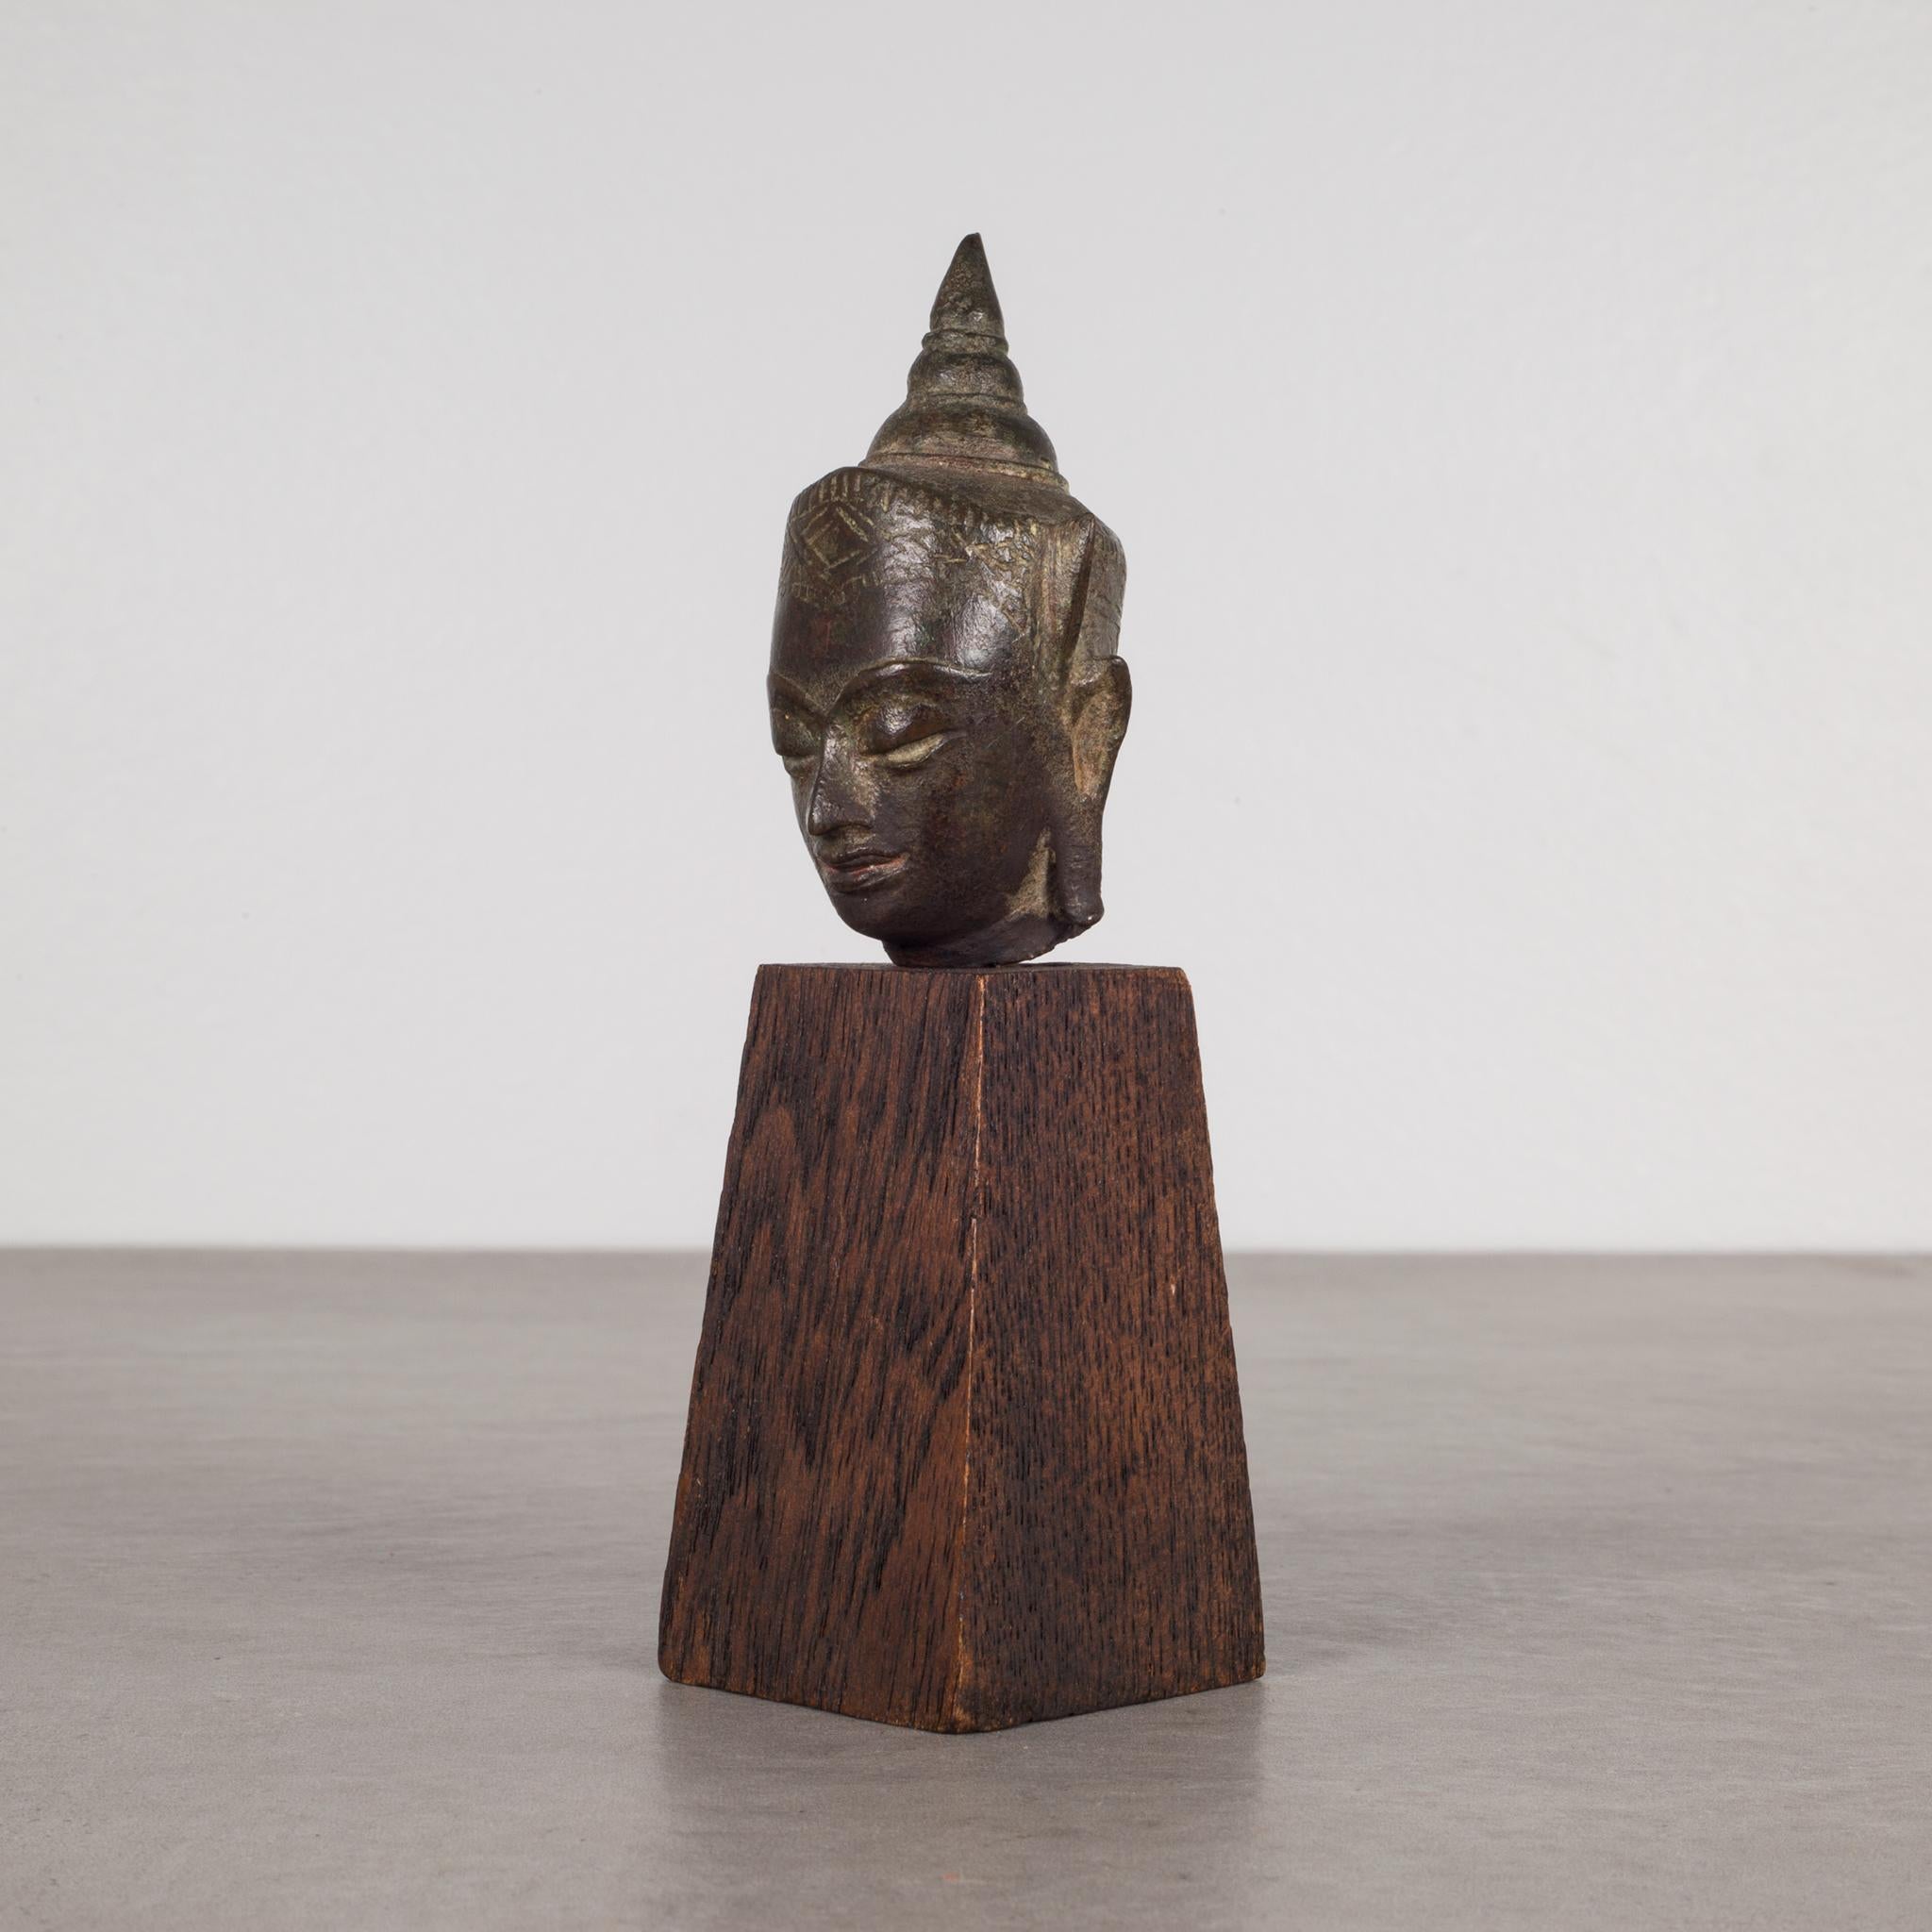 About:

This is an original lost-wax casting bronze head of Buddah Shakyamuni from the 19th century, Thailand. It is mounted on a contemporary wood base. His meditative expression, arched eyebrows, downcast eyes, smiling lips, elongated earlobes